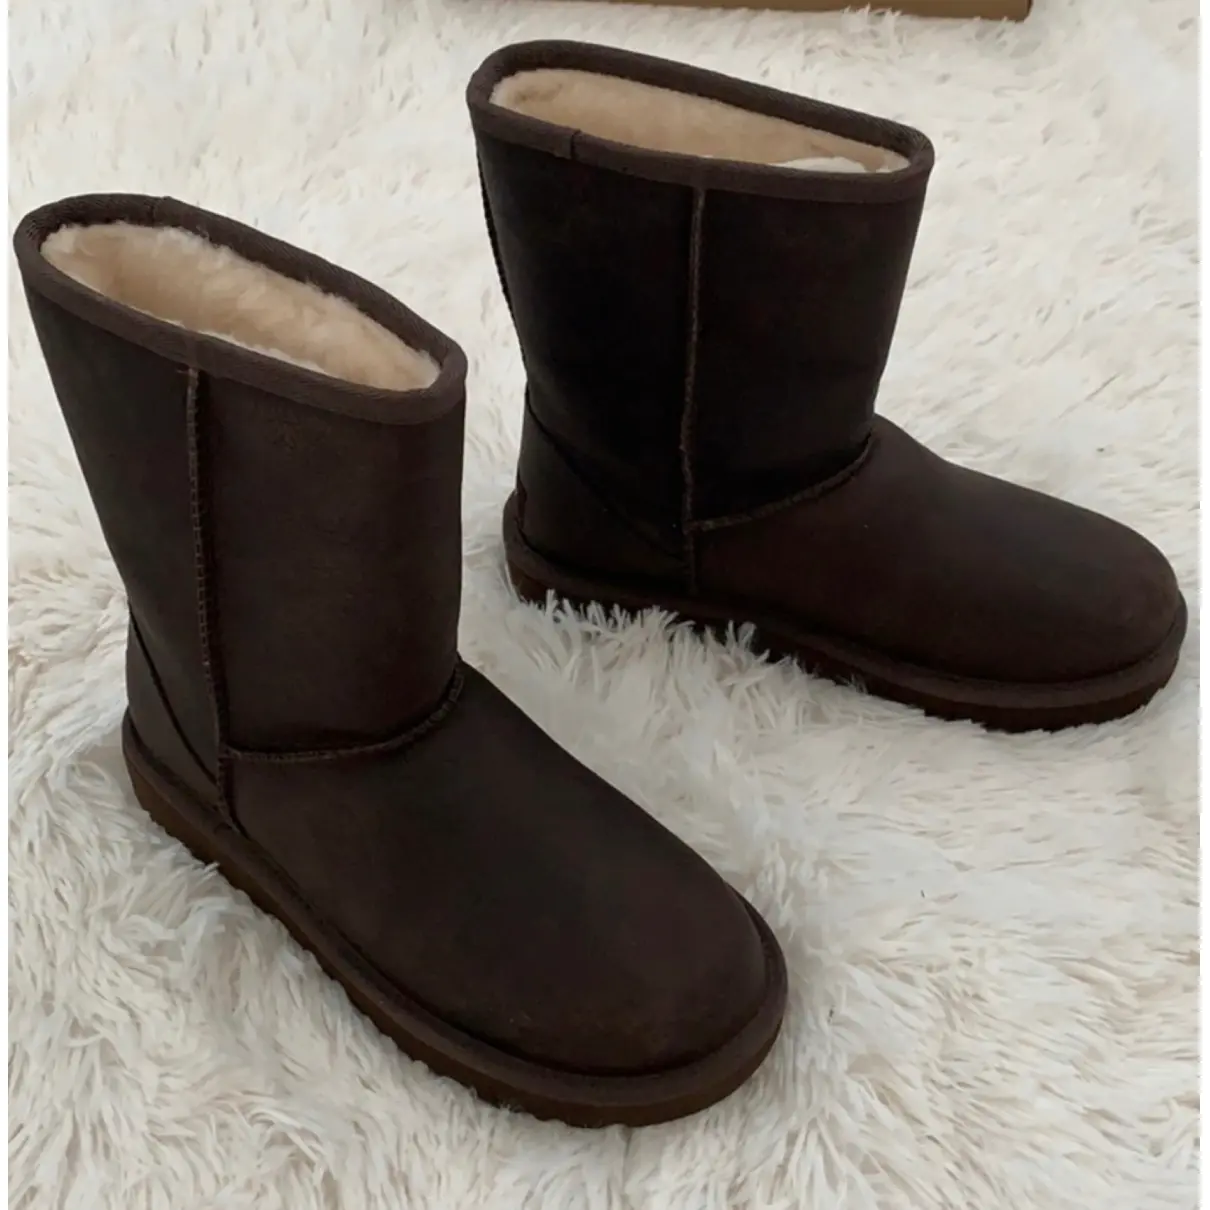 Buy Ugg Leather ankle boots online